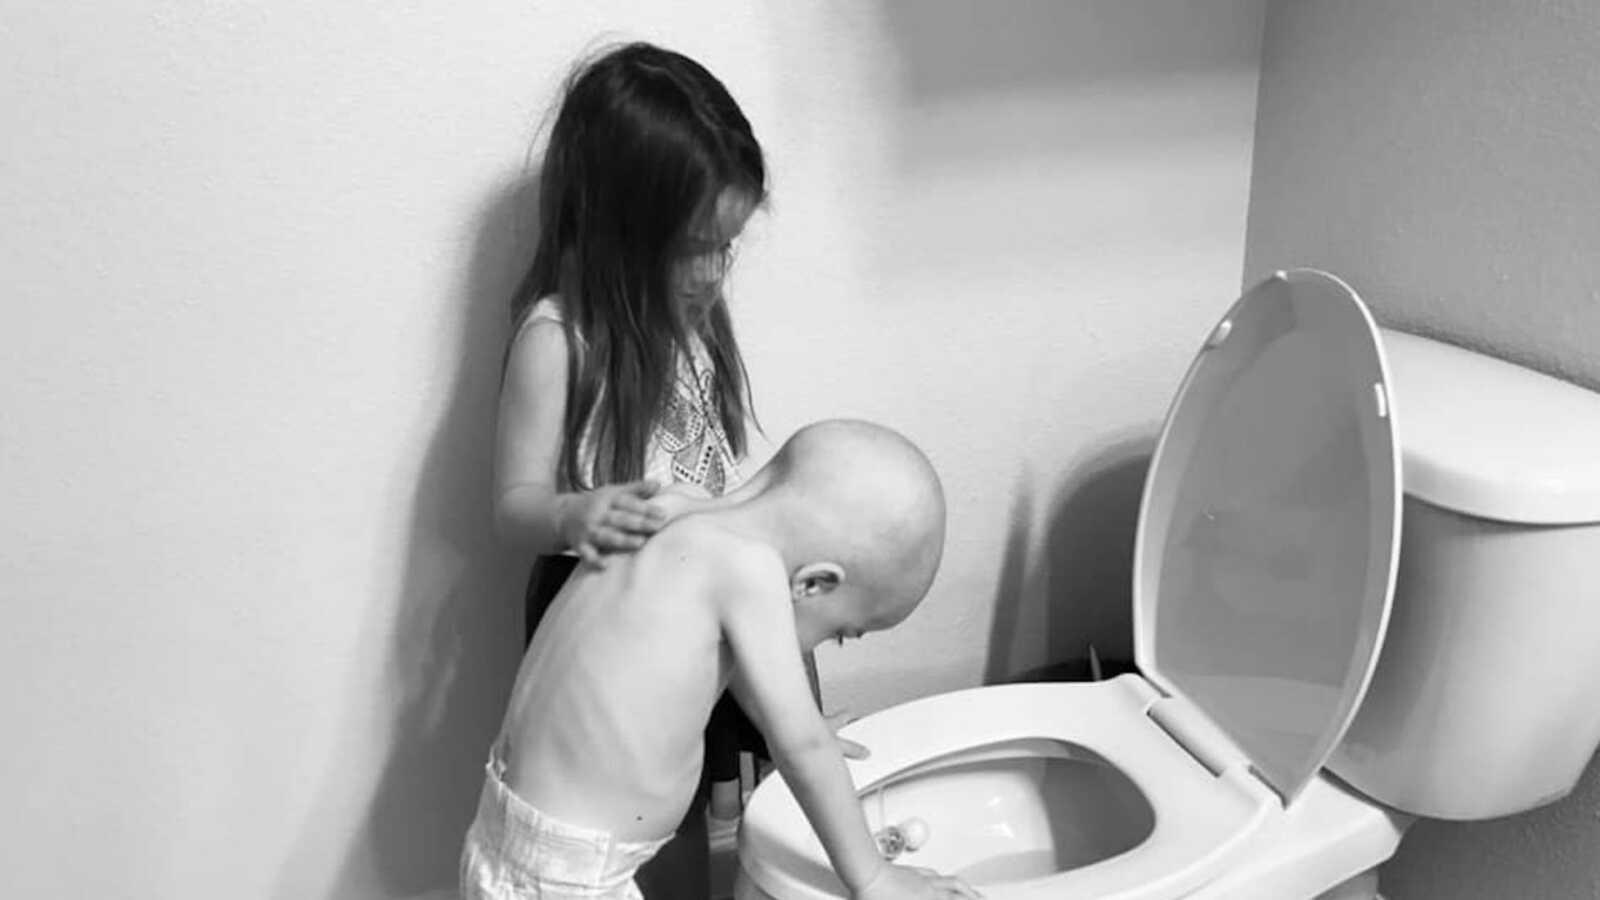 young, sick boy standing at toilet with sister by his side